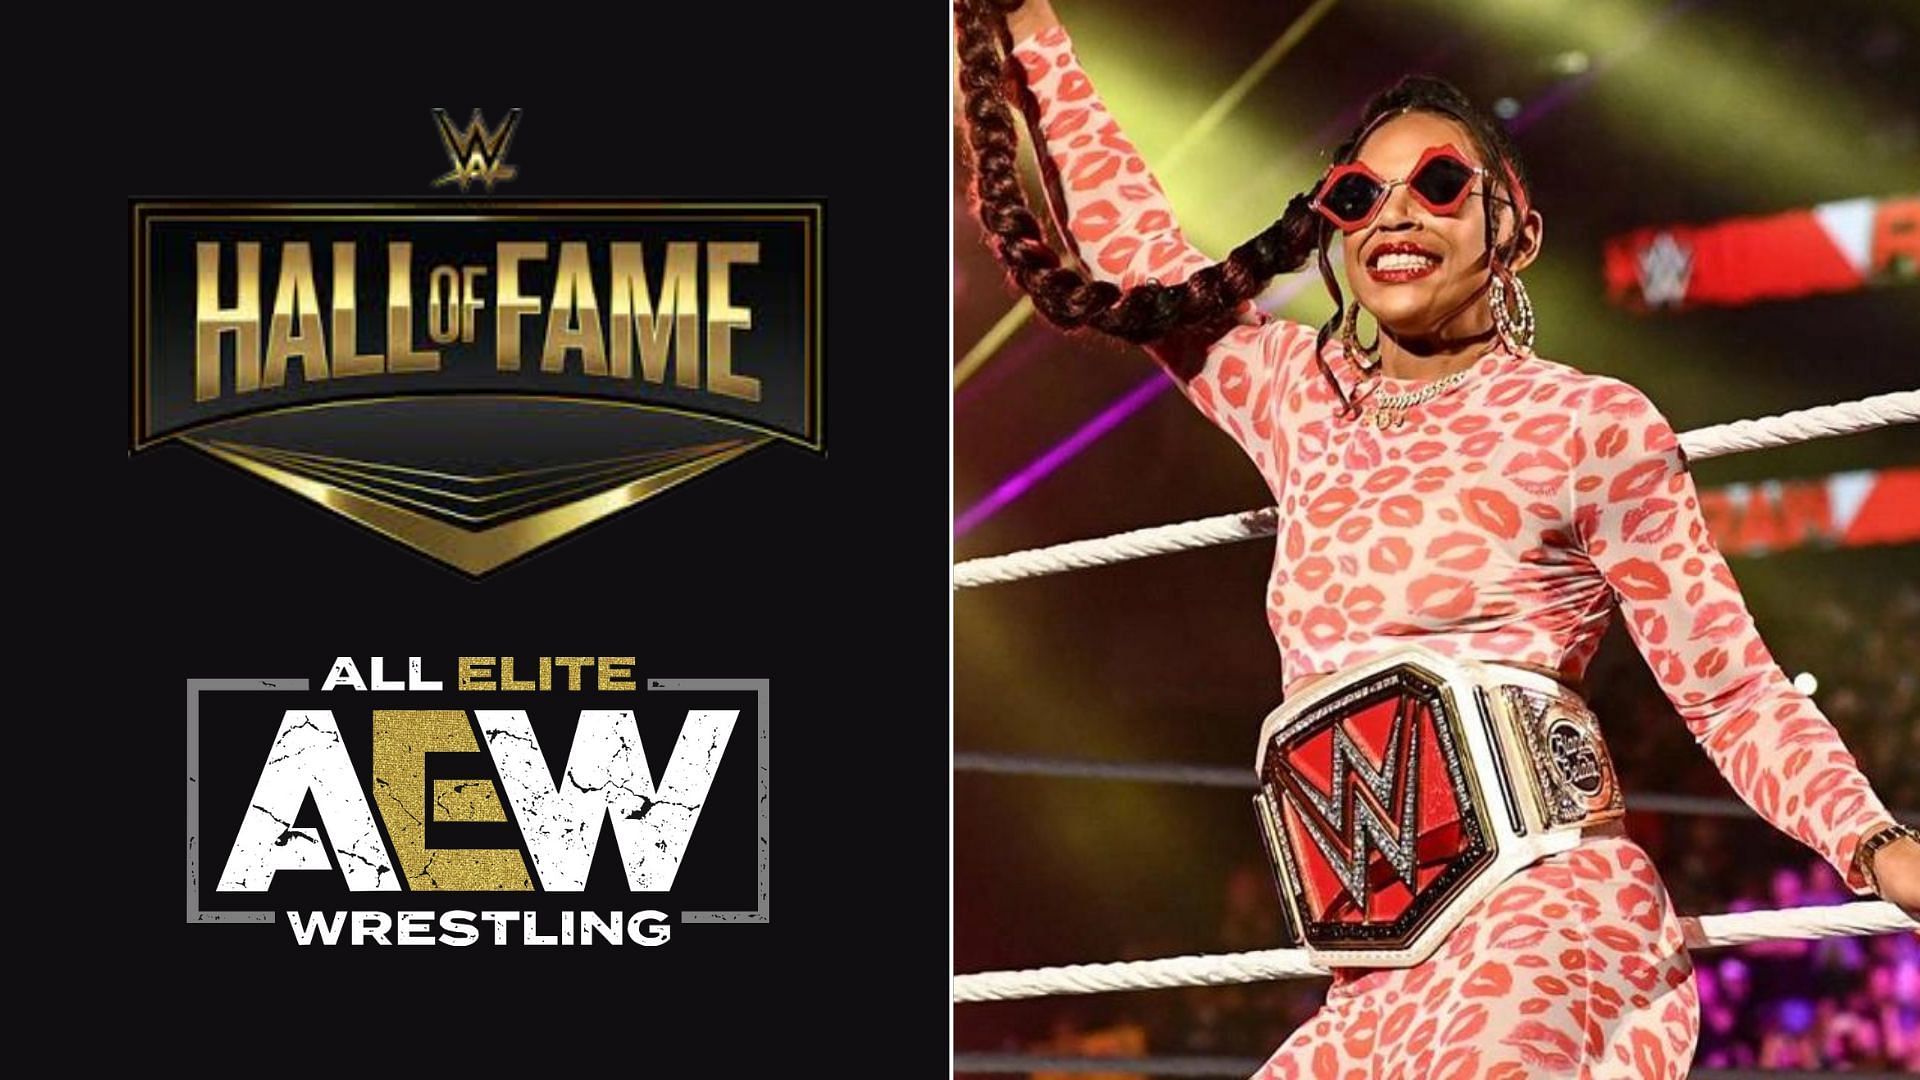 WWE Hall of Fame and AEW logos (left), Bianca Belair (right)